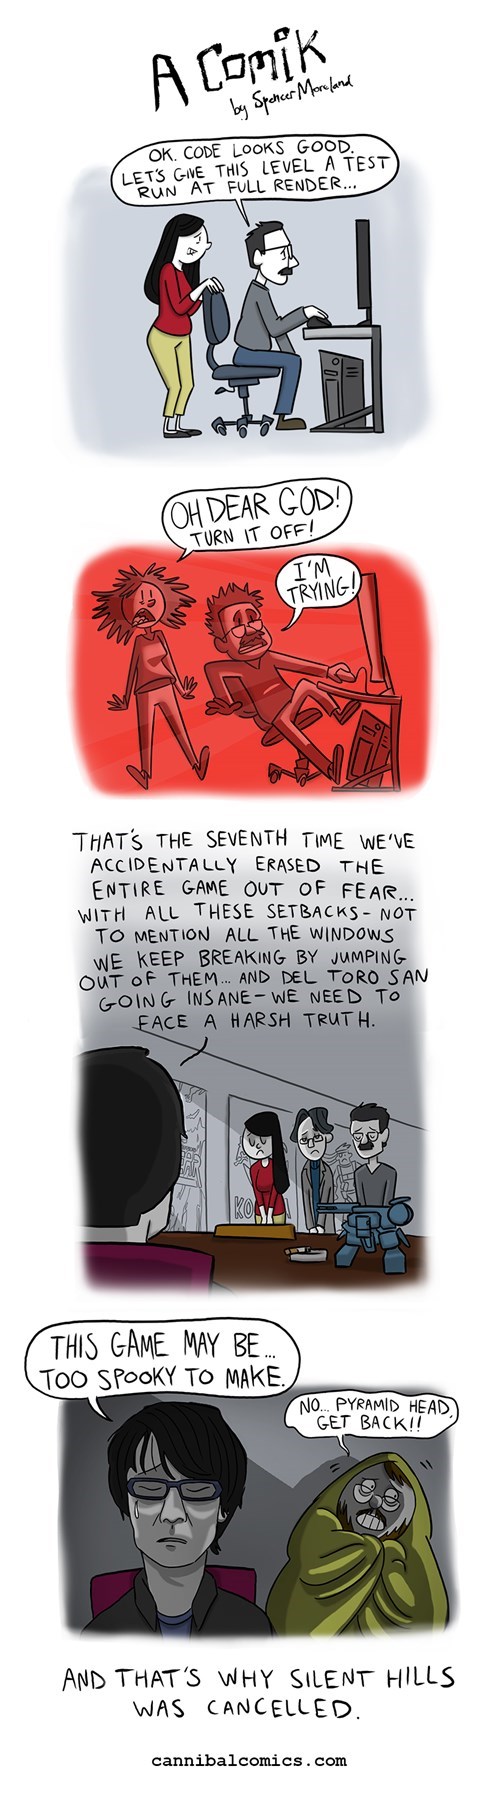 The Comic That Explains Why Silent Hills Was Cancelled